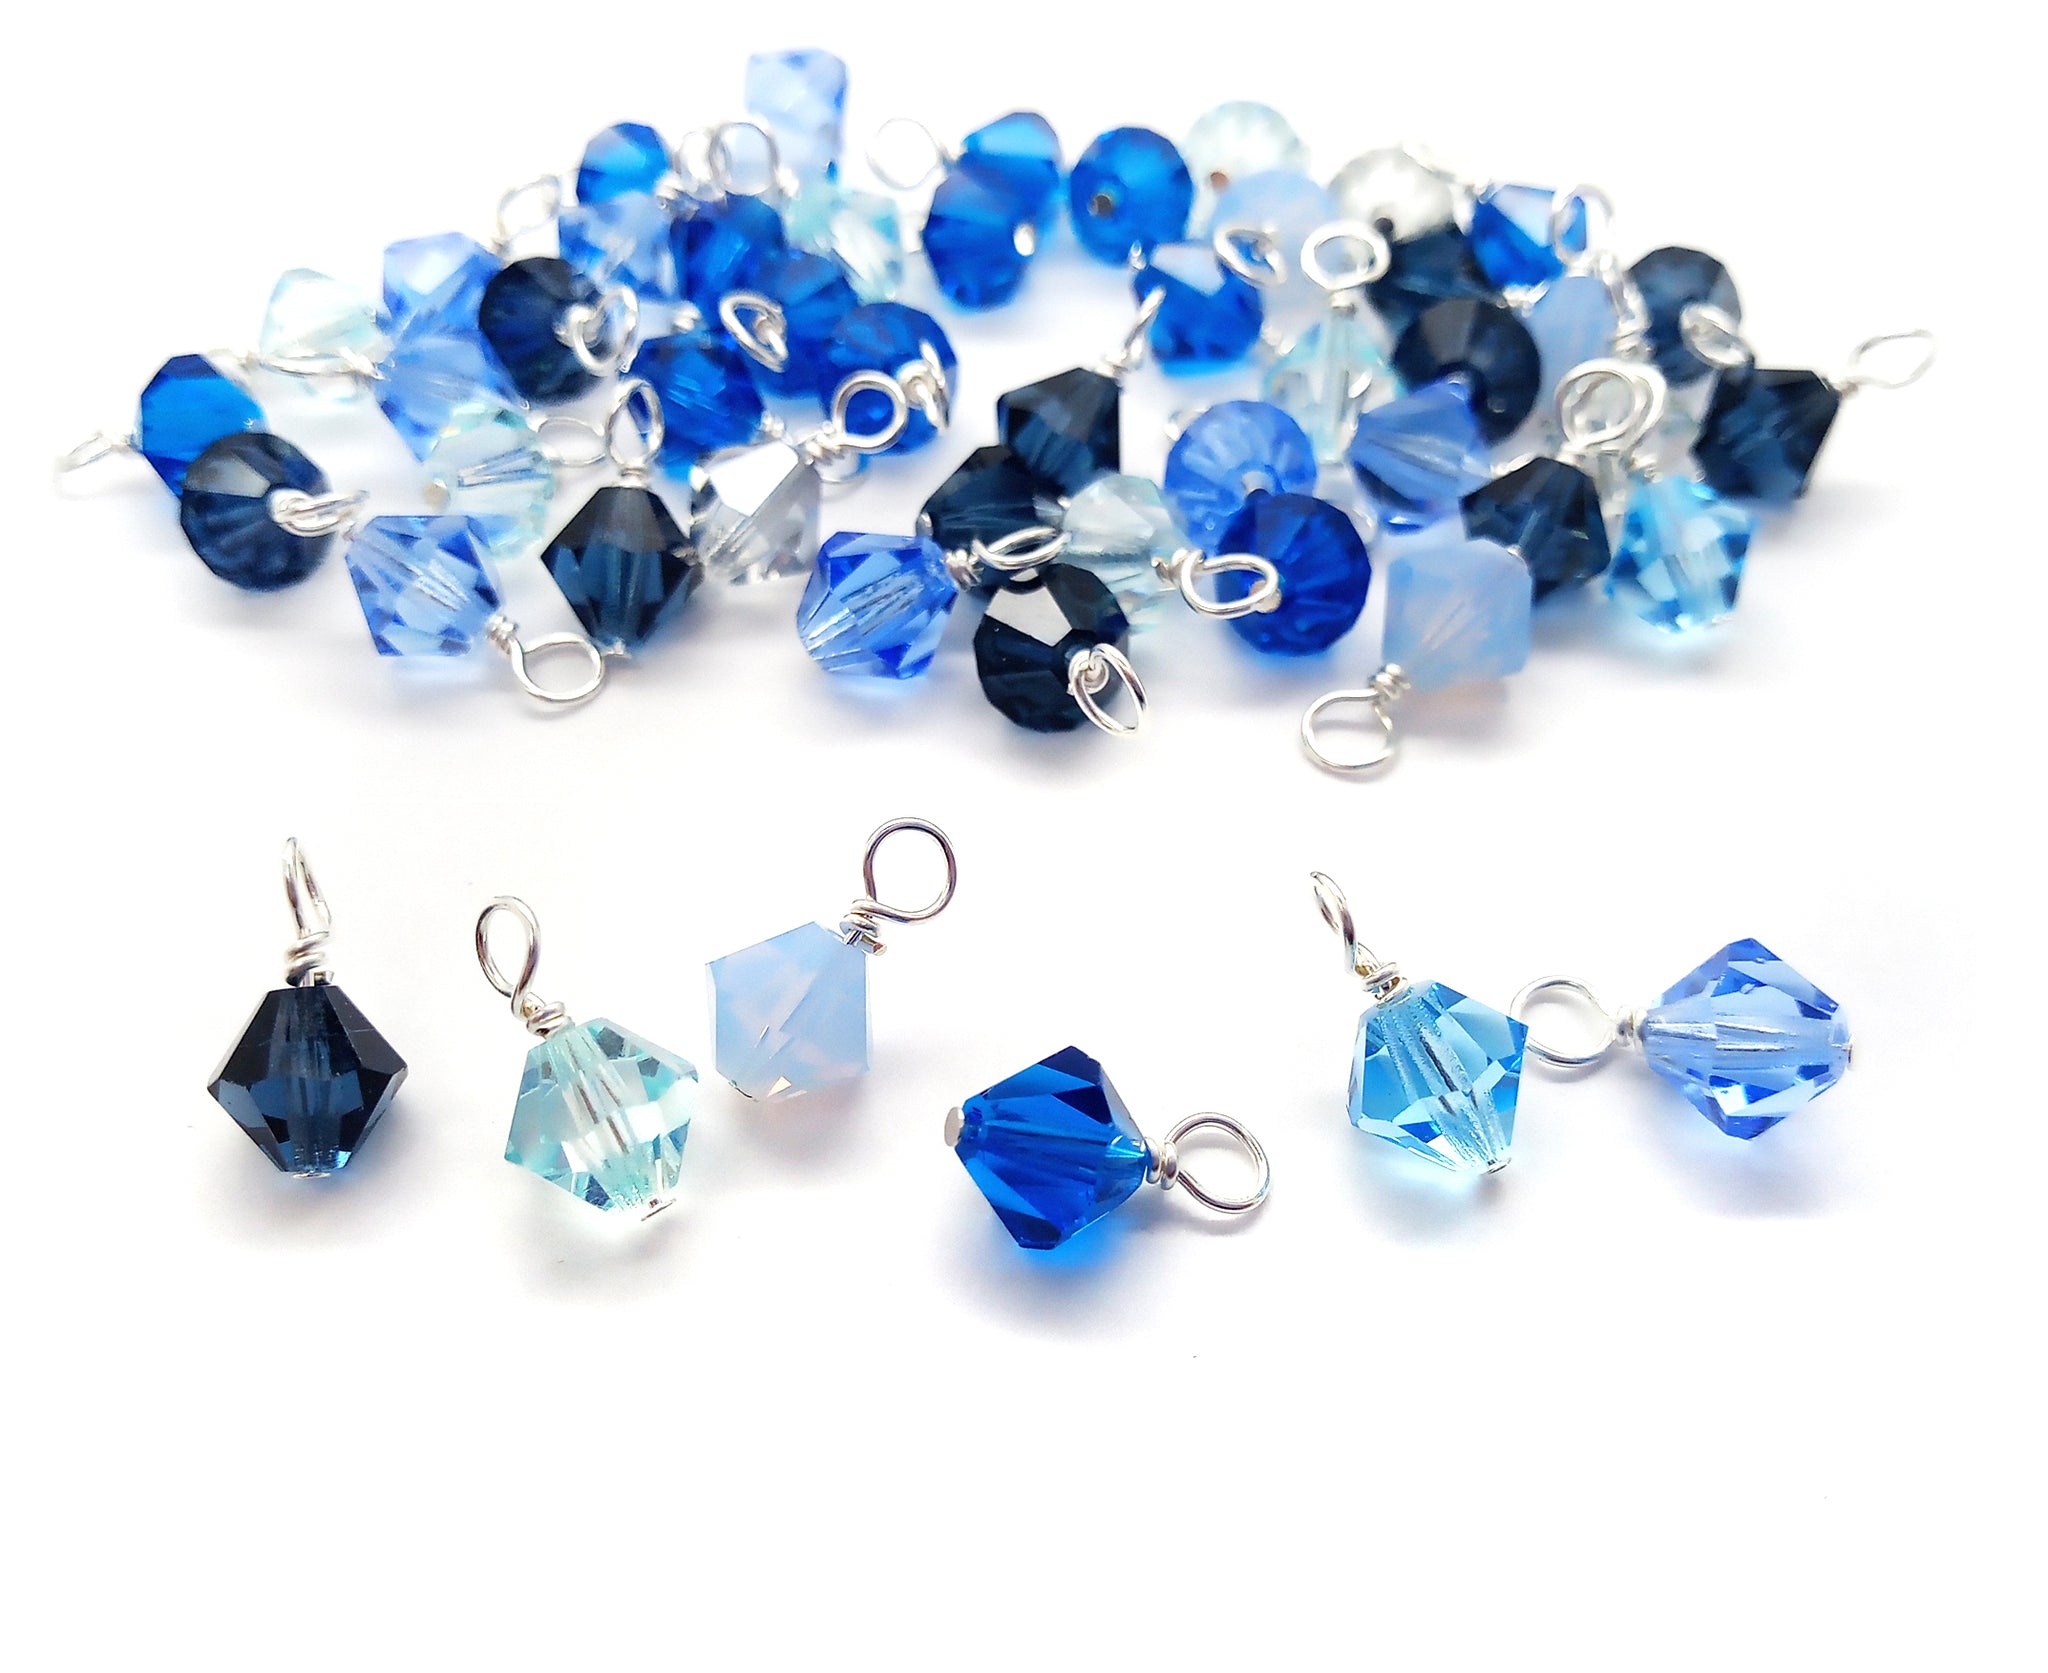 Blue Bicone Dangles, 25 Crystal 6mm Bead Charms in Various Blue Shades